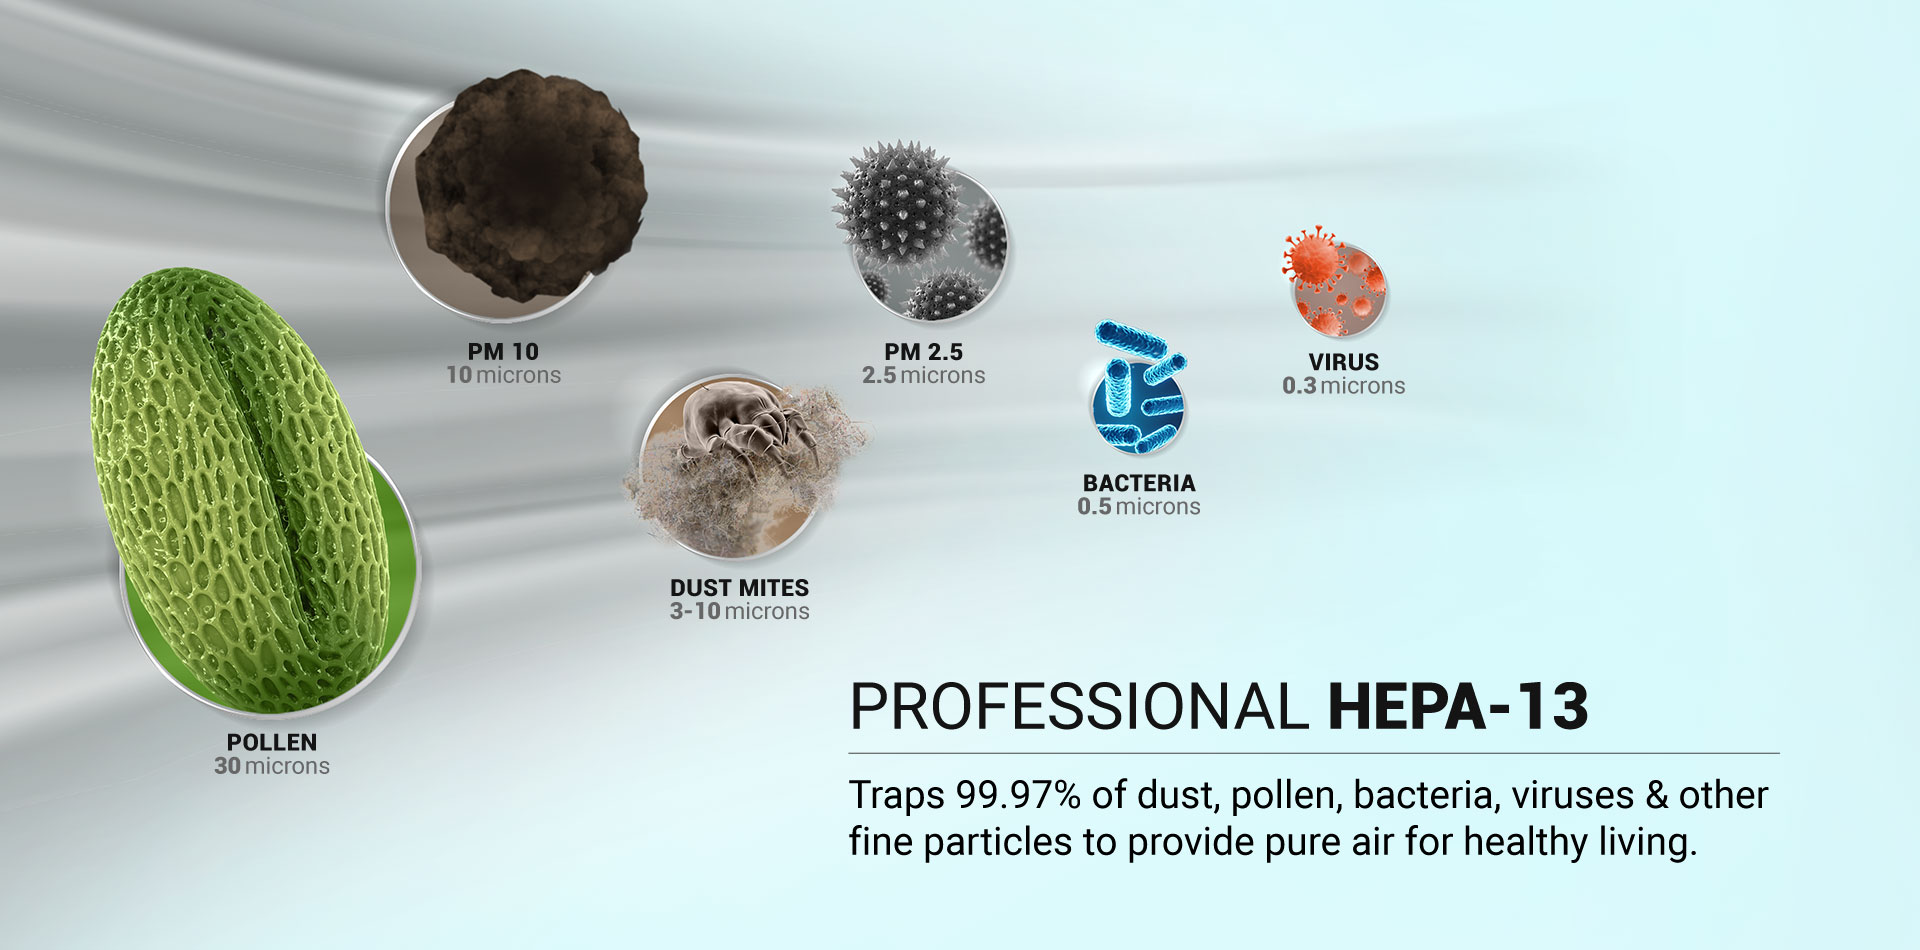 Trap 99.97% of dust, pollen, bacteria, viruses & other fine particles to provides pure air for healthy living.